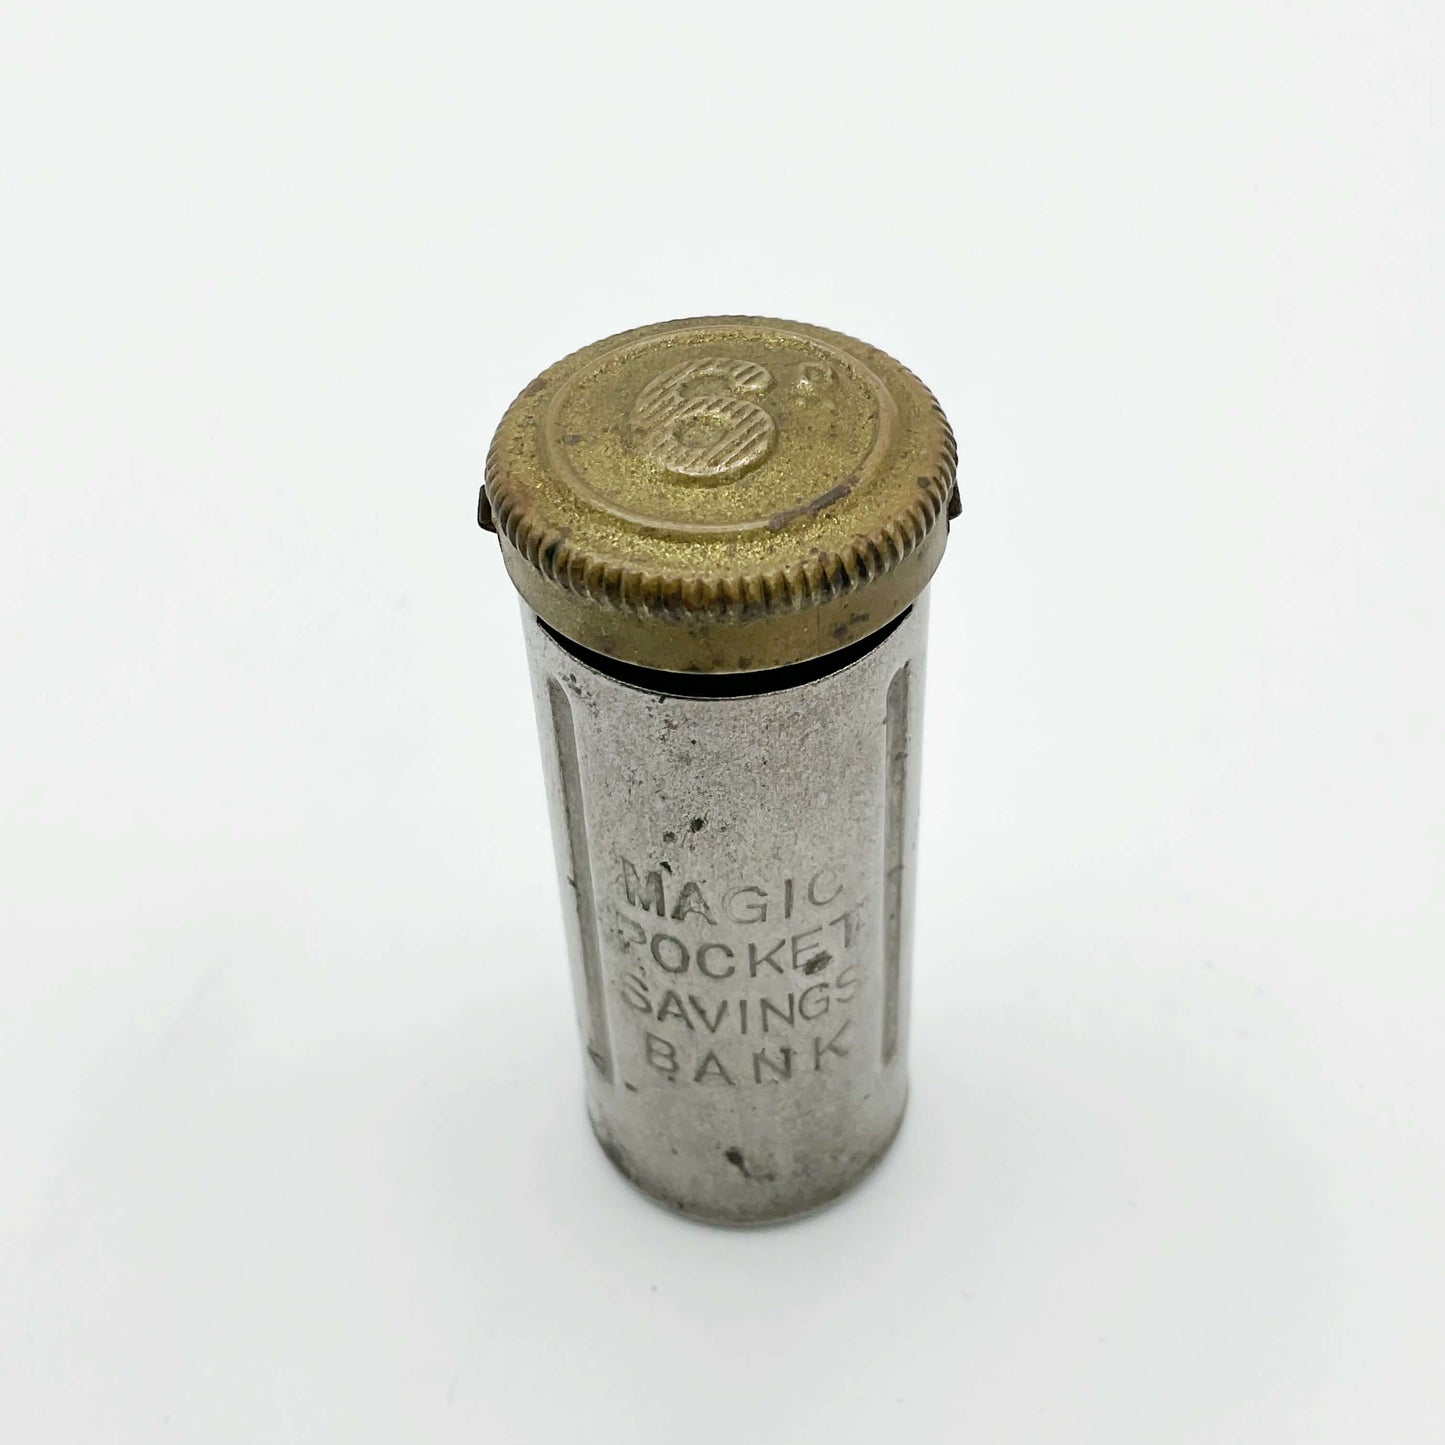 Vintage coin holder called the Magic Pocket Savings Bank on a white background